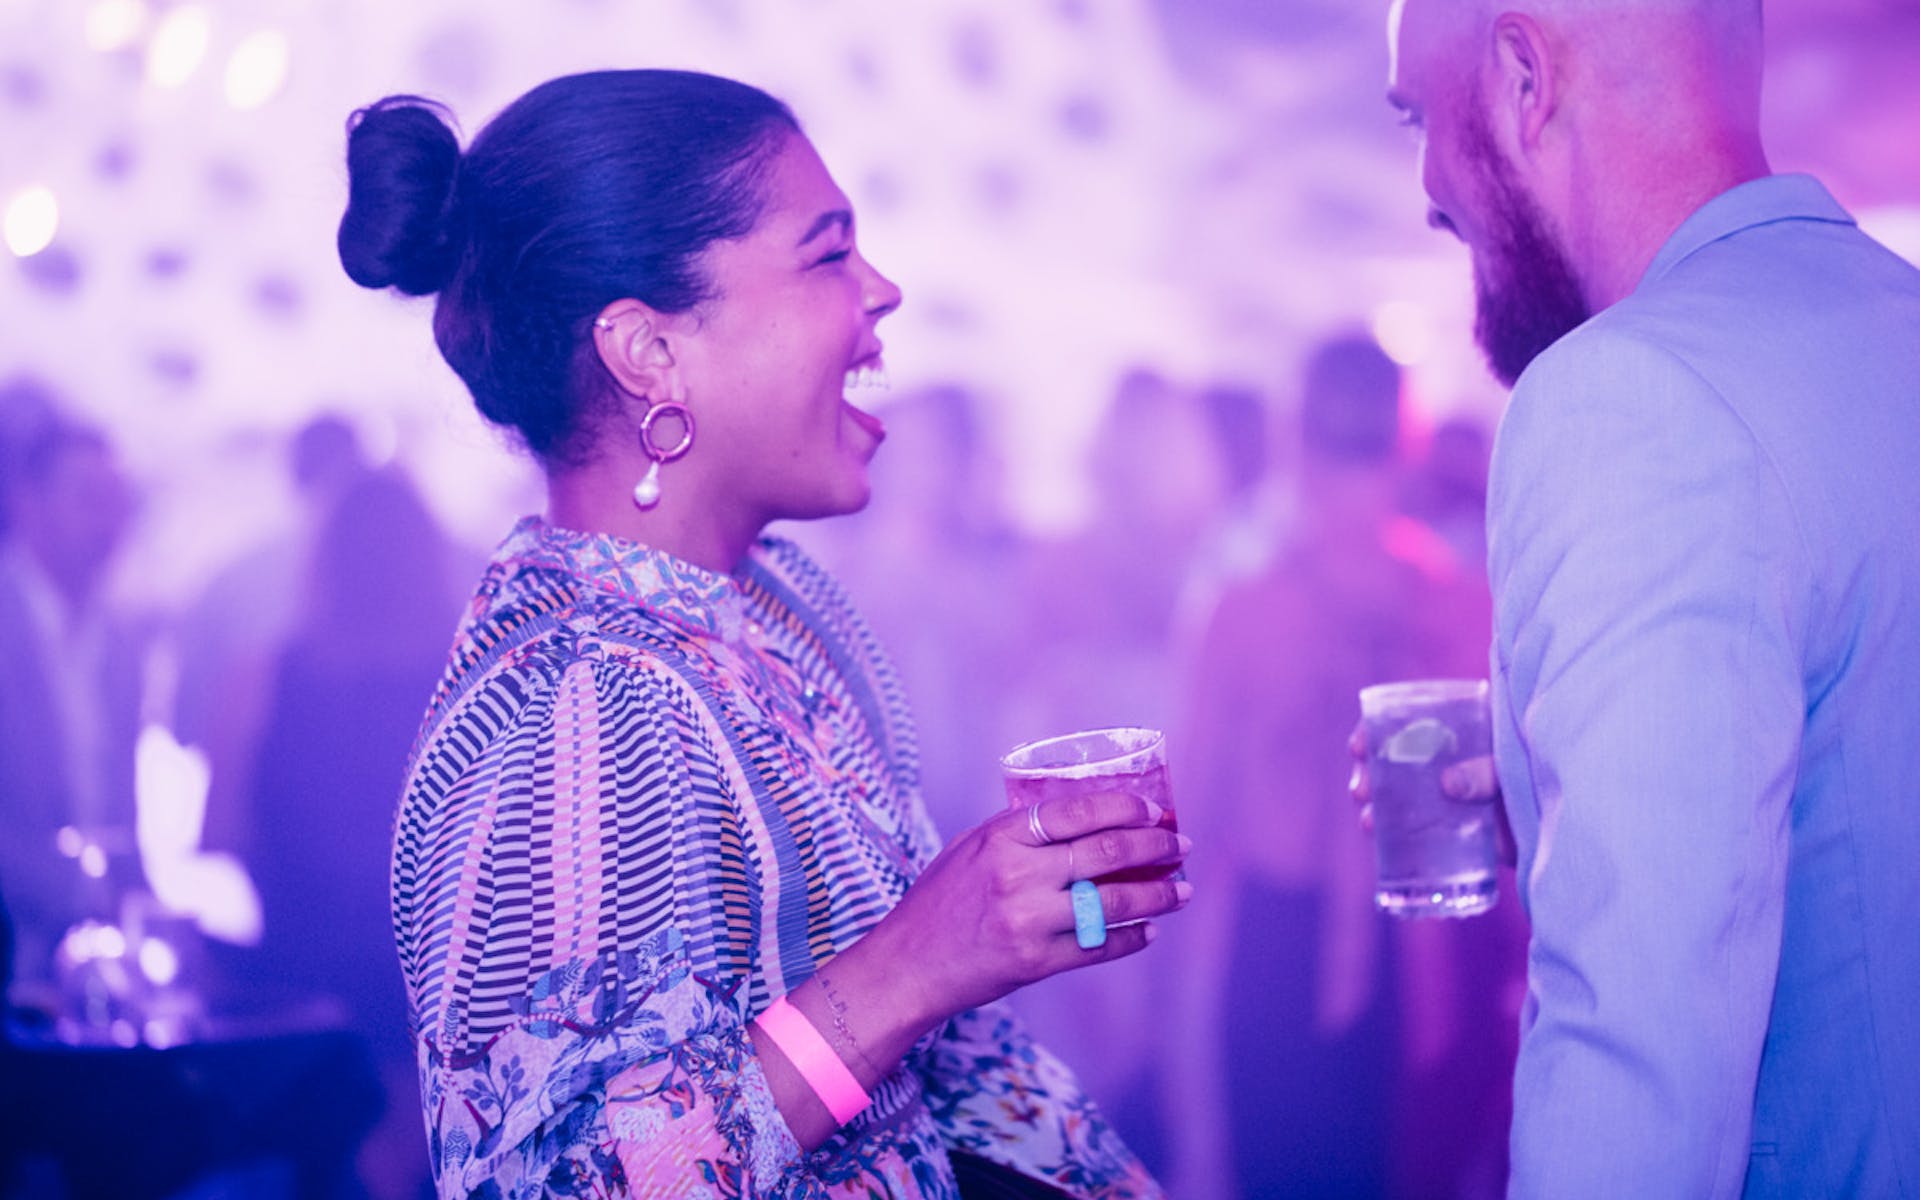 A woman laughs while holding a drink and talking to a man at a party where the room is bathed in purple light.